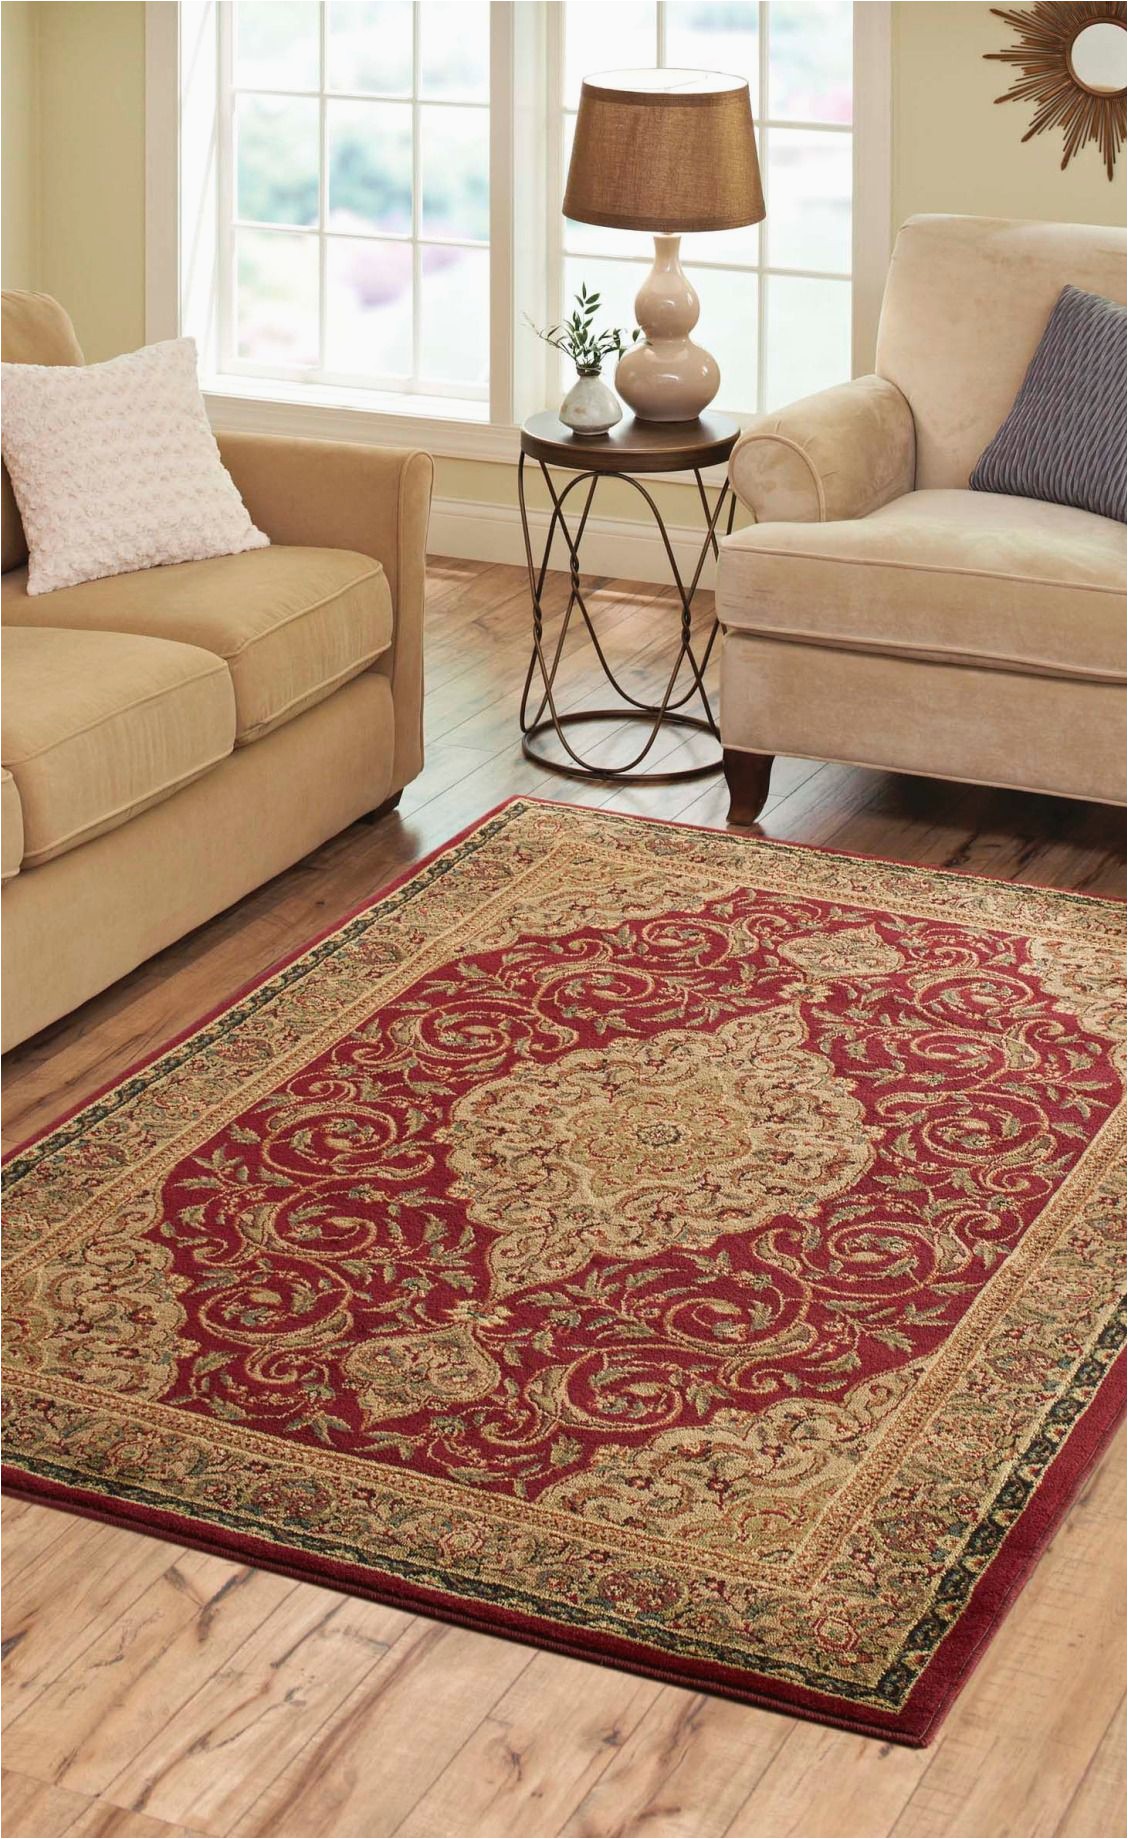 Walmart area Rugs Better Homes and Gardens Better Homes and Gardens Gina area Rug